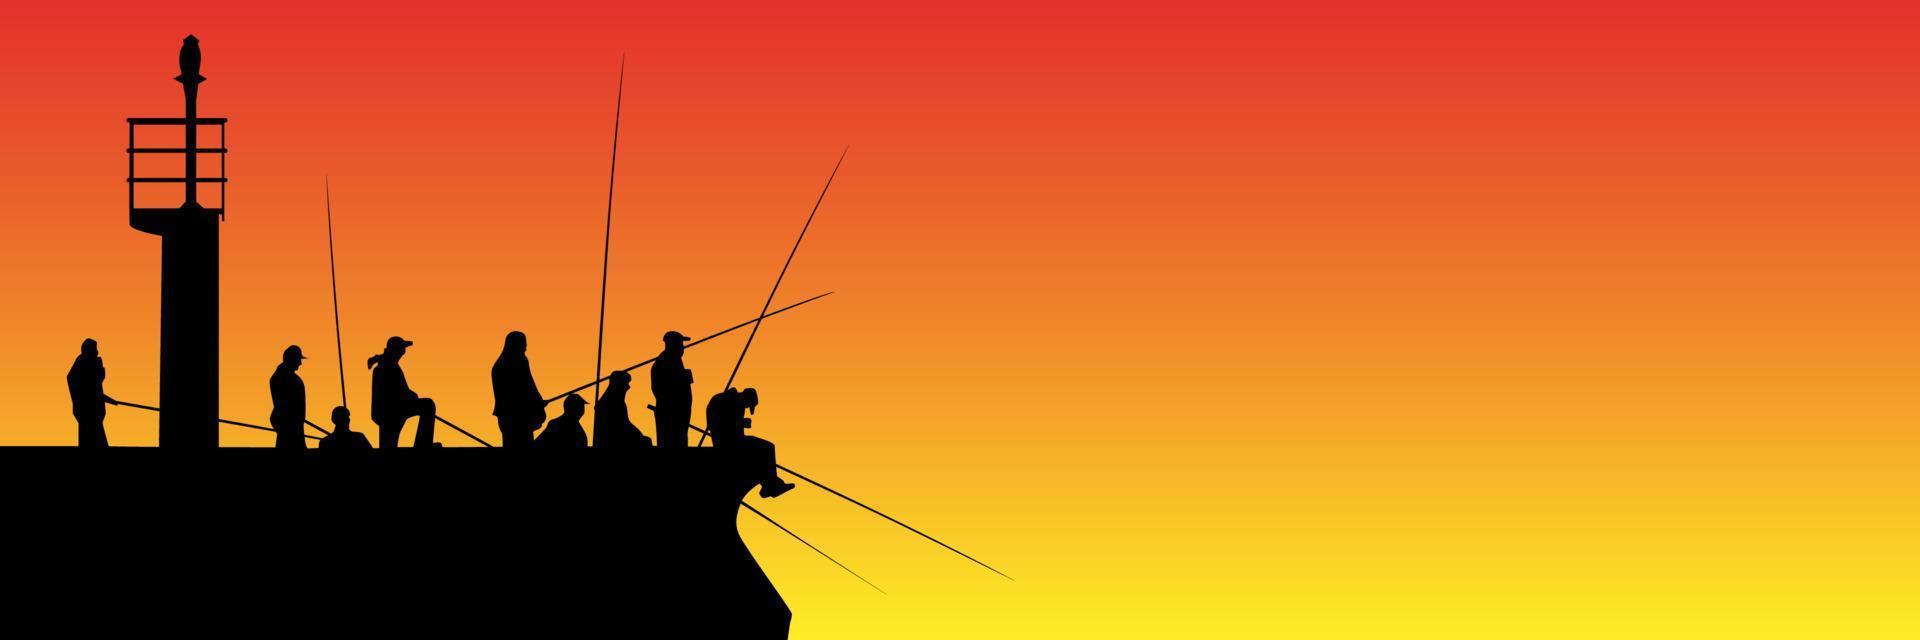 Fishing Rod Silhouette PNG Free, Fishing Jetty Outline Vector Rod, Outline,  Text Space, Jetty PNG Image For Free Download